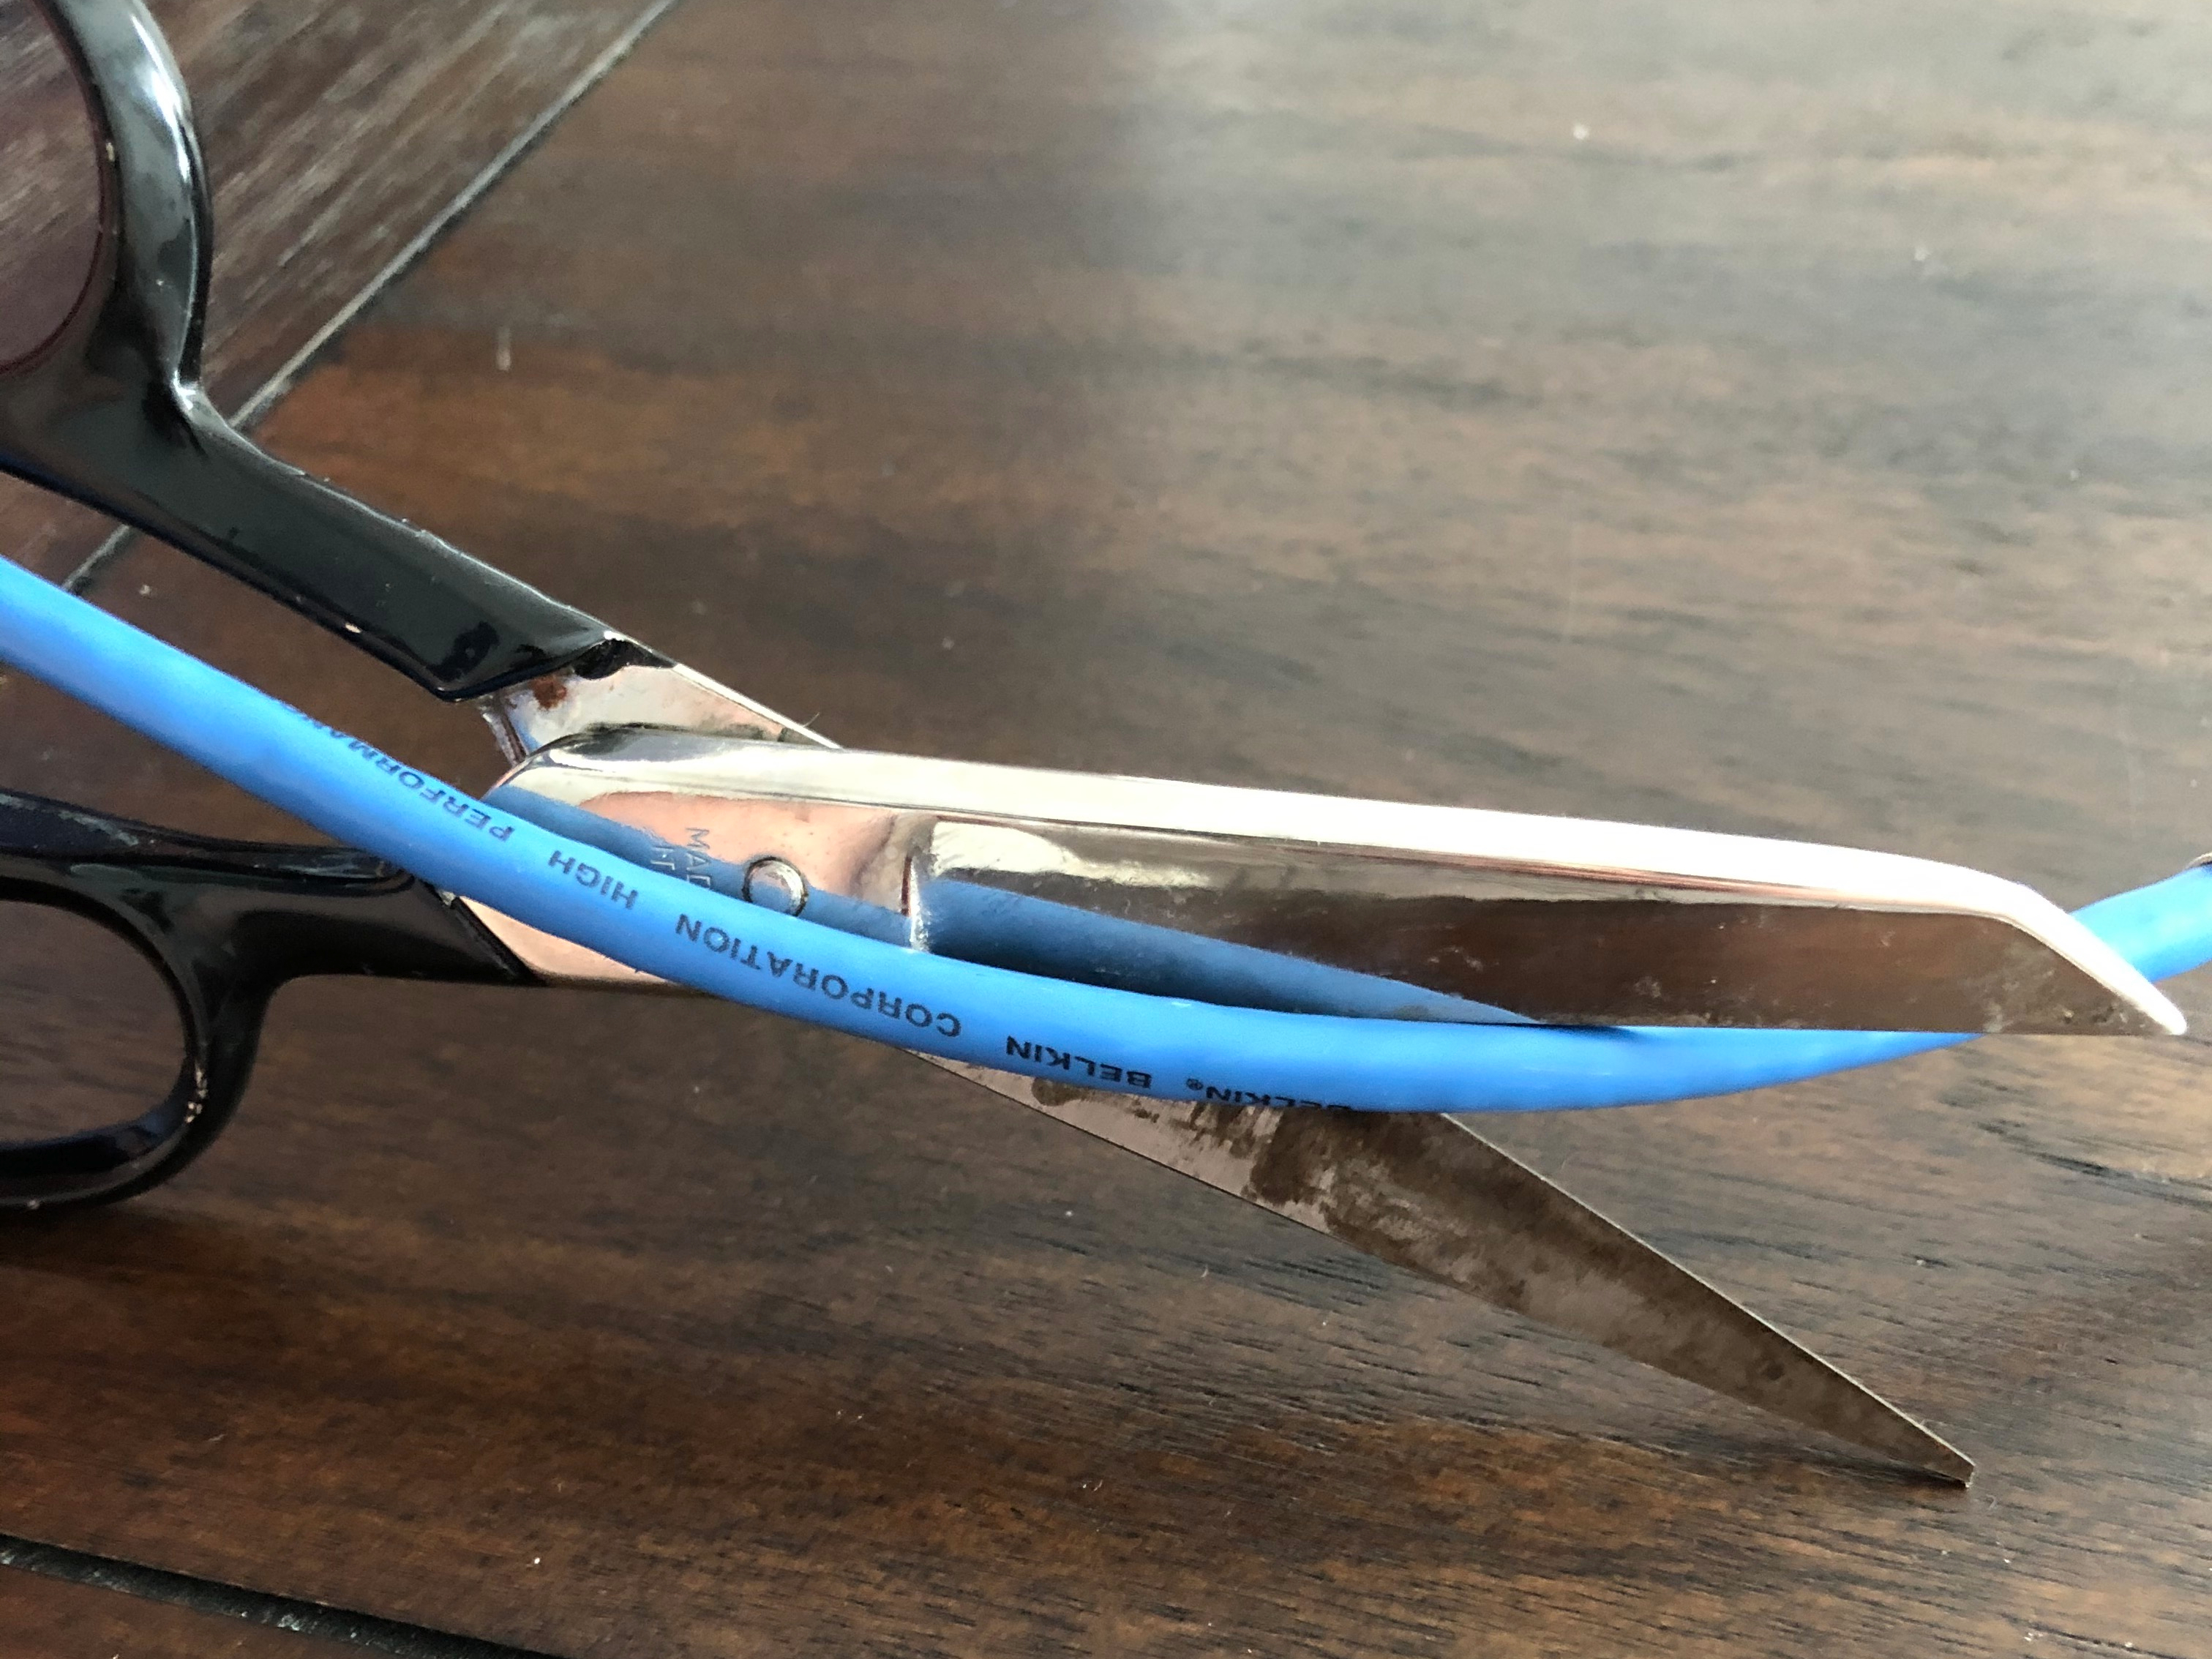 Tarnished scissors cutting through blue cable